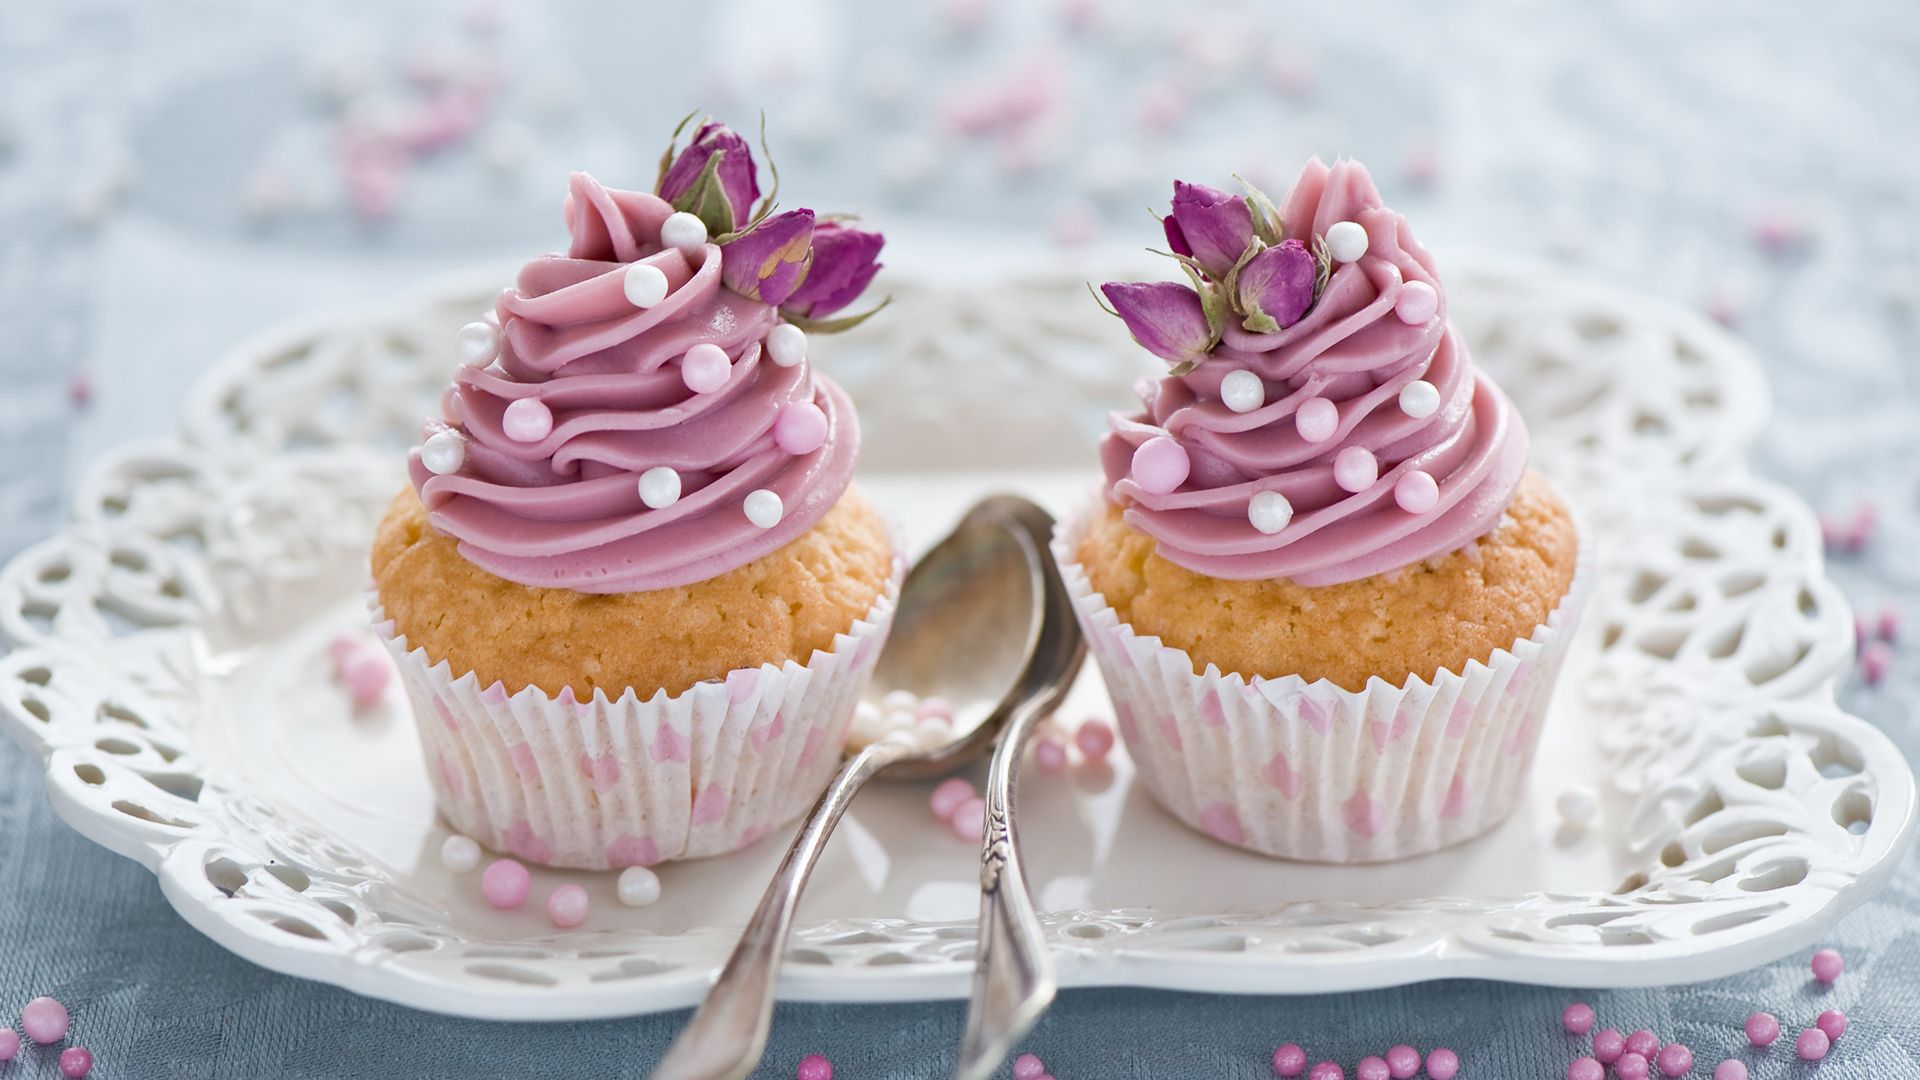 Two cupcakes with pink frosting on a white plate - Cupcakes